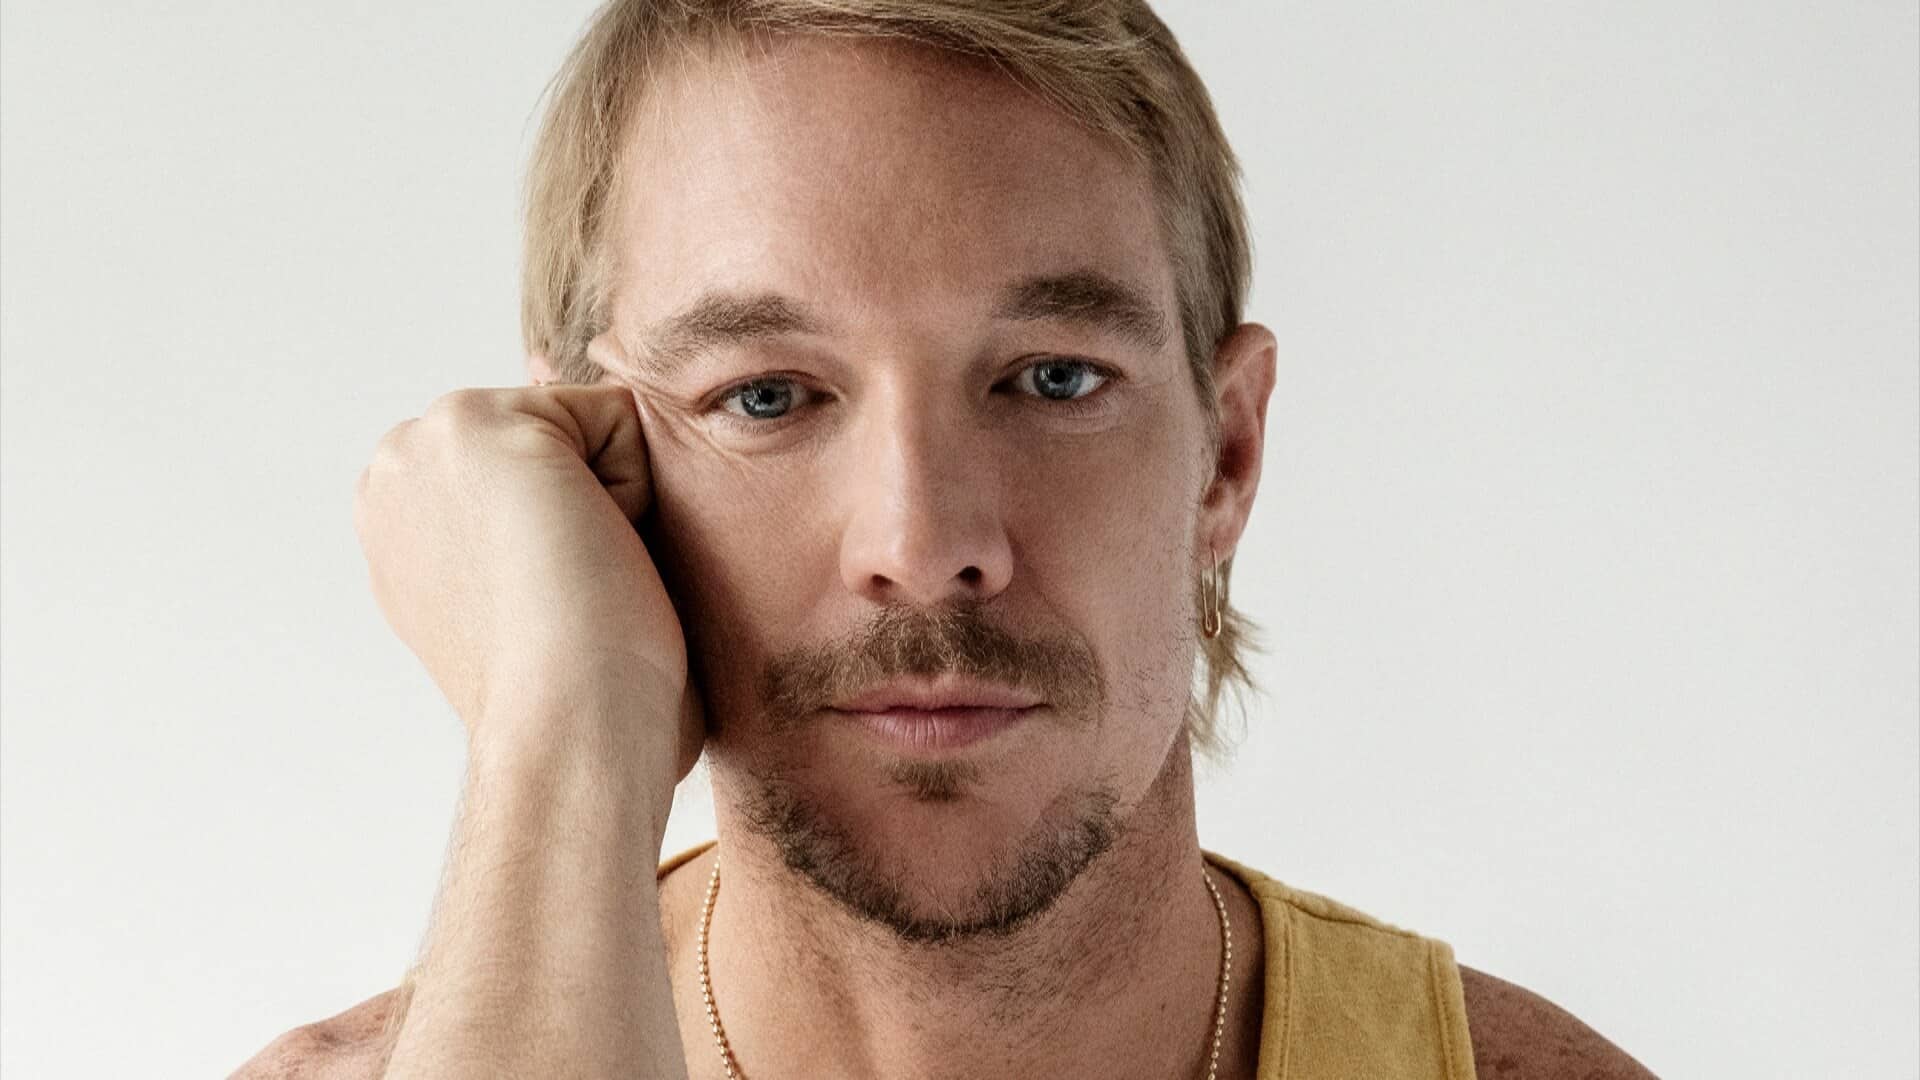 Diplo set to feature as playable character in FIFA 21